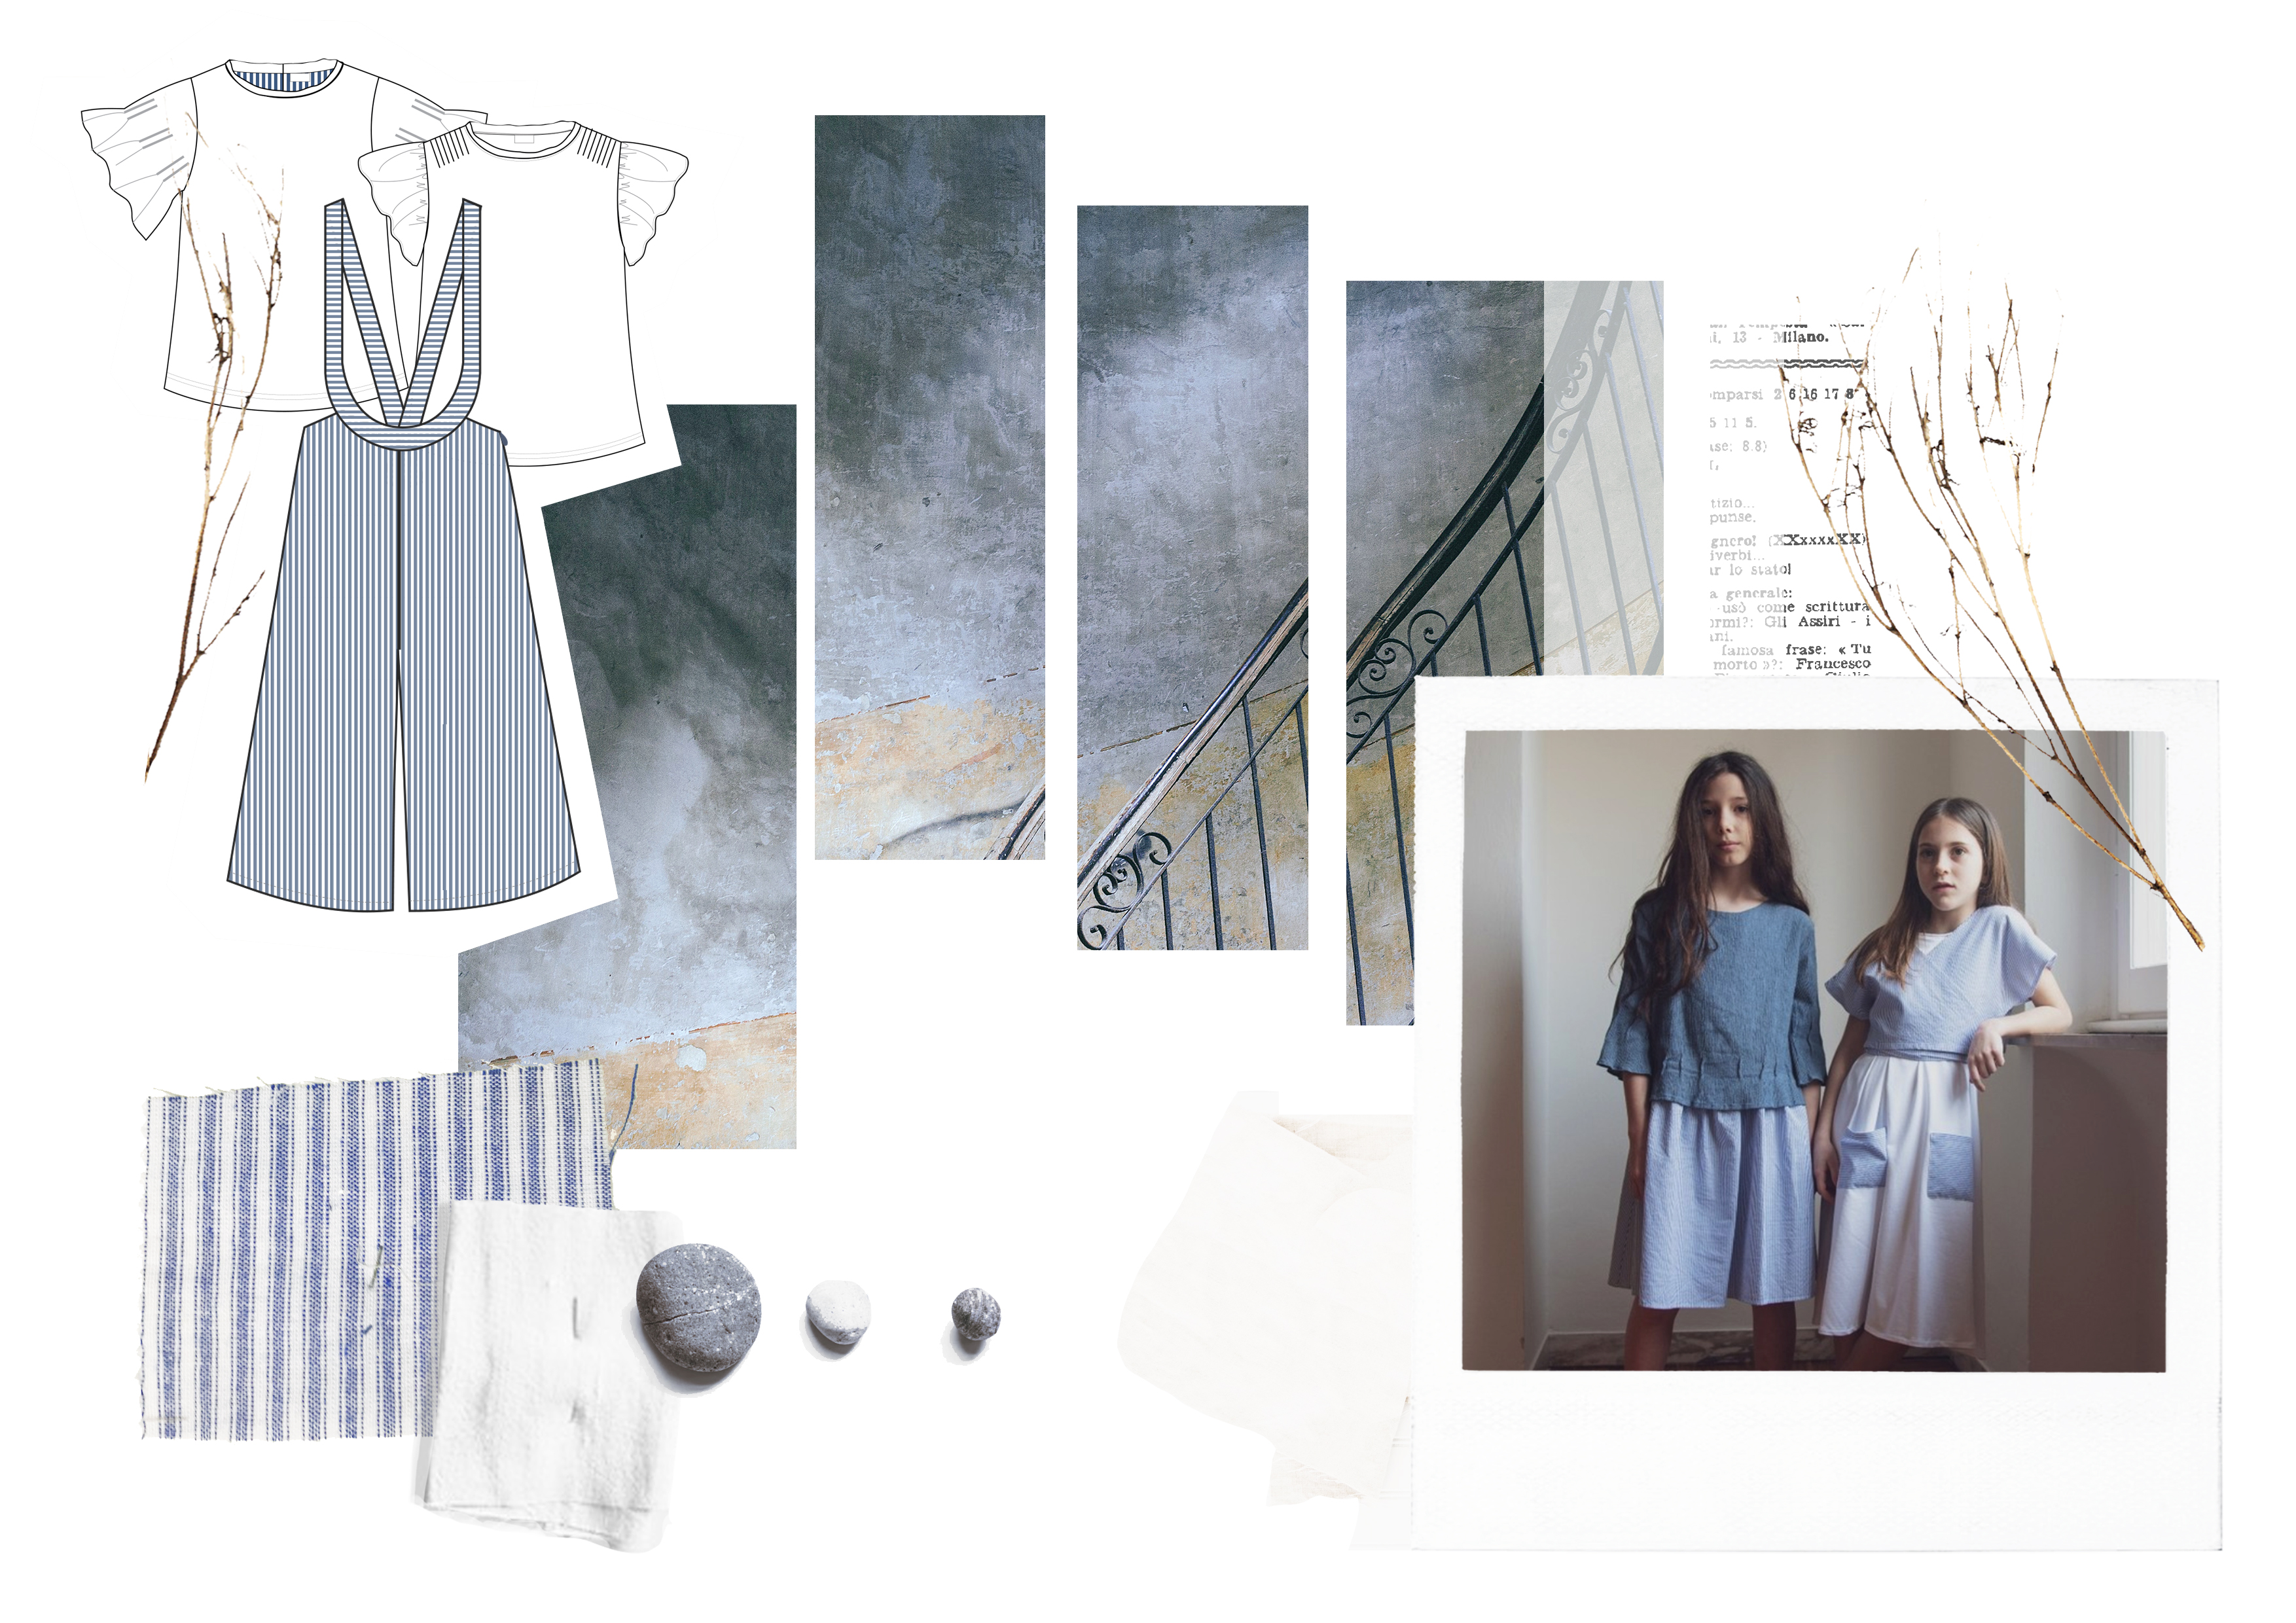 Extract from Spring/Summer Girlswear collection from 8 to 16 years old. Tasks involved Fabric sourcing, Technical Design, Specification Sheets drafting, Prototype check and Collection presentation.